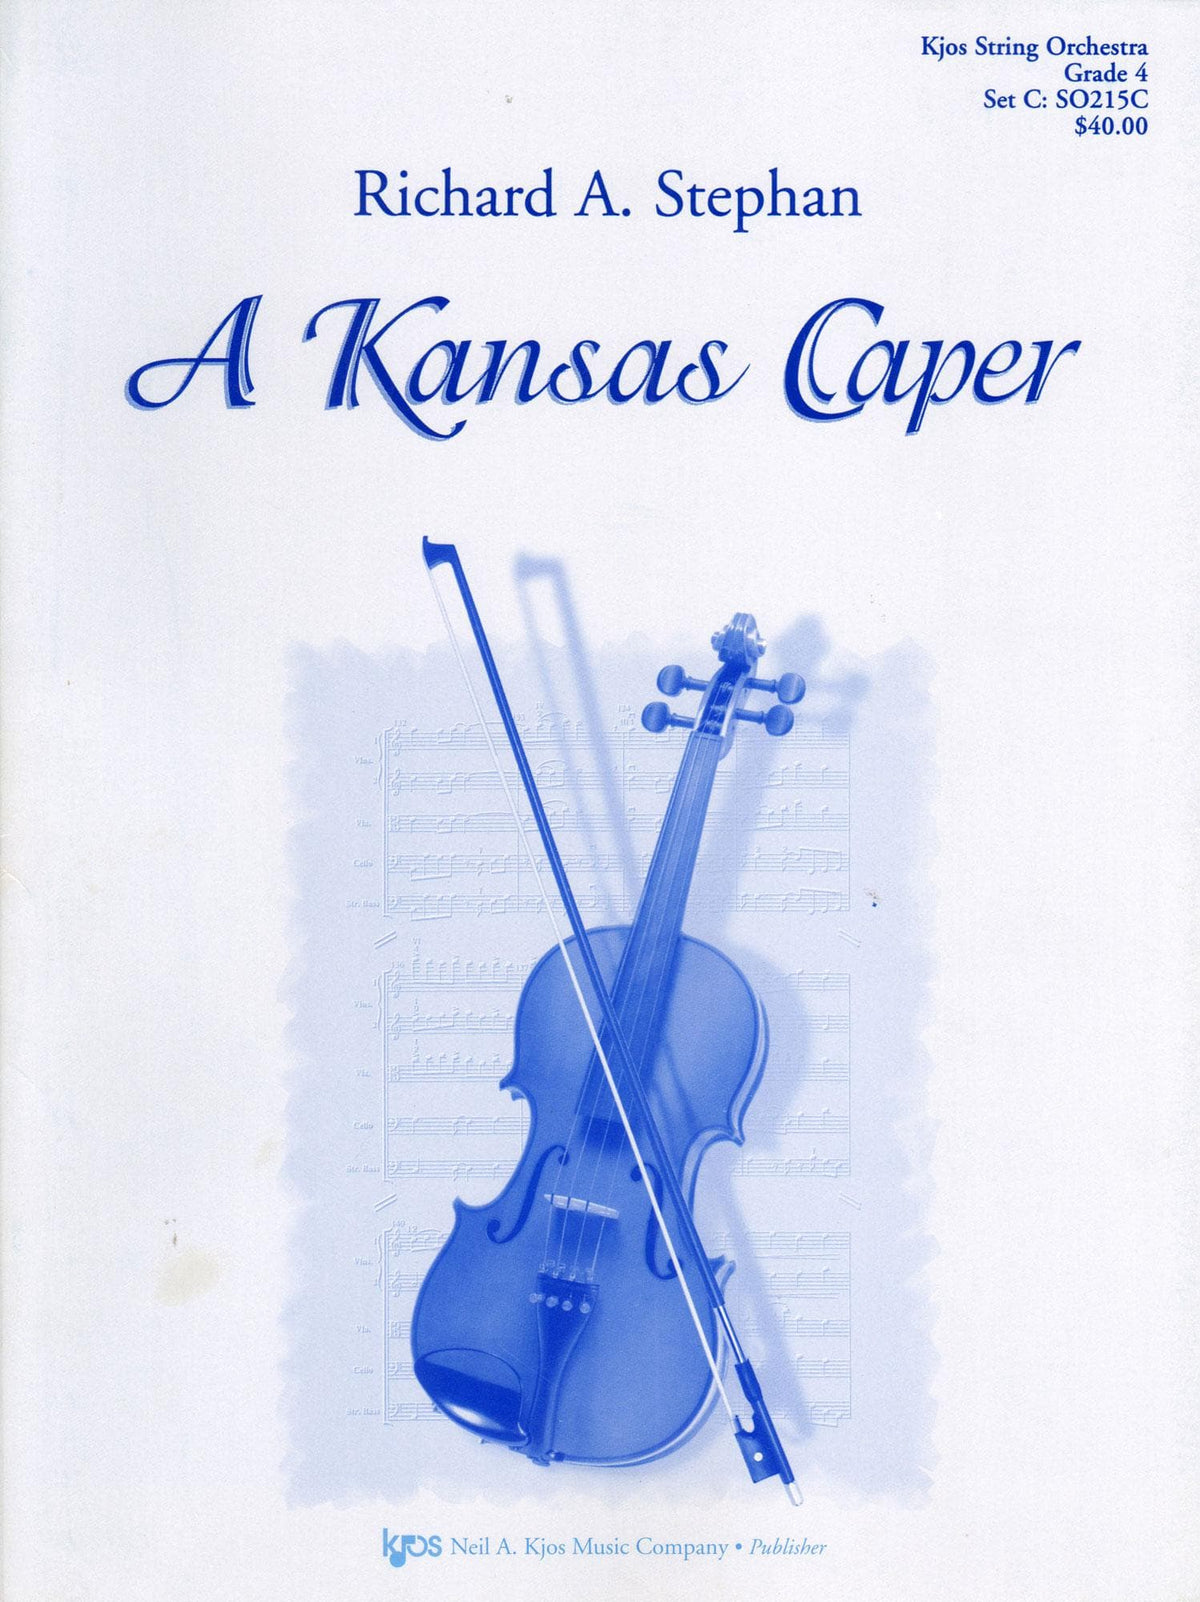 Stephan, Richard - A Kansas Caper - String Orchestra - Published by Neil A. Kjos Music Company.